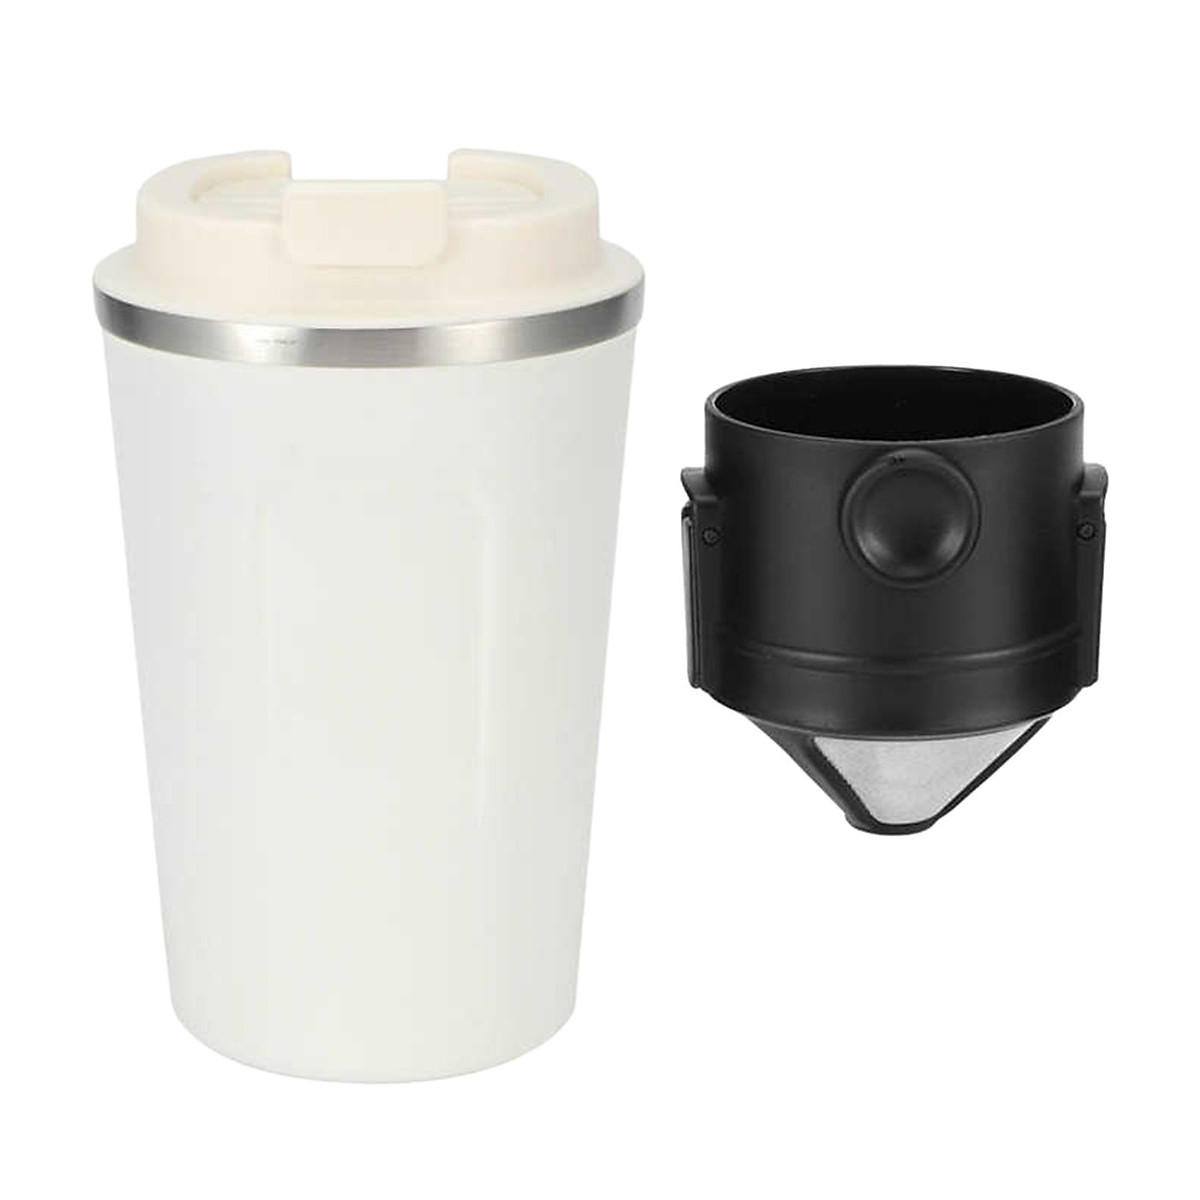 Stainless Steel Tumbler Vacuum Coffee Mug Spill-Proof Lid Home Office Travel